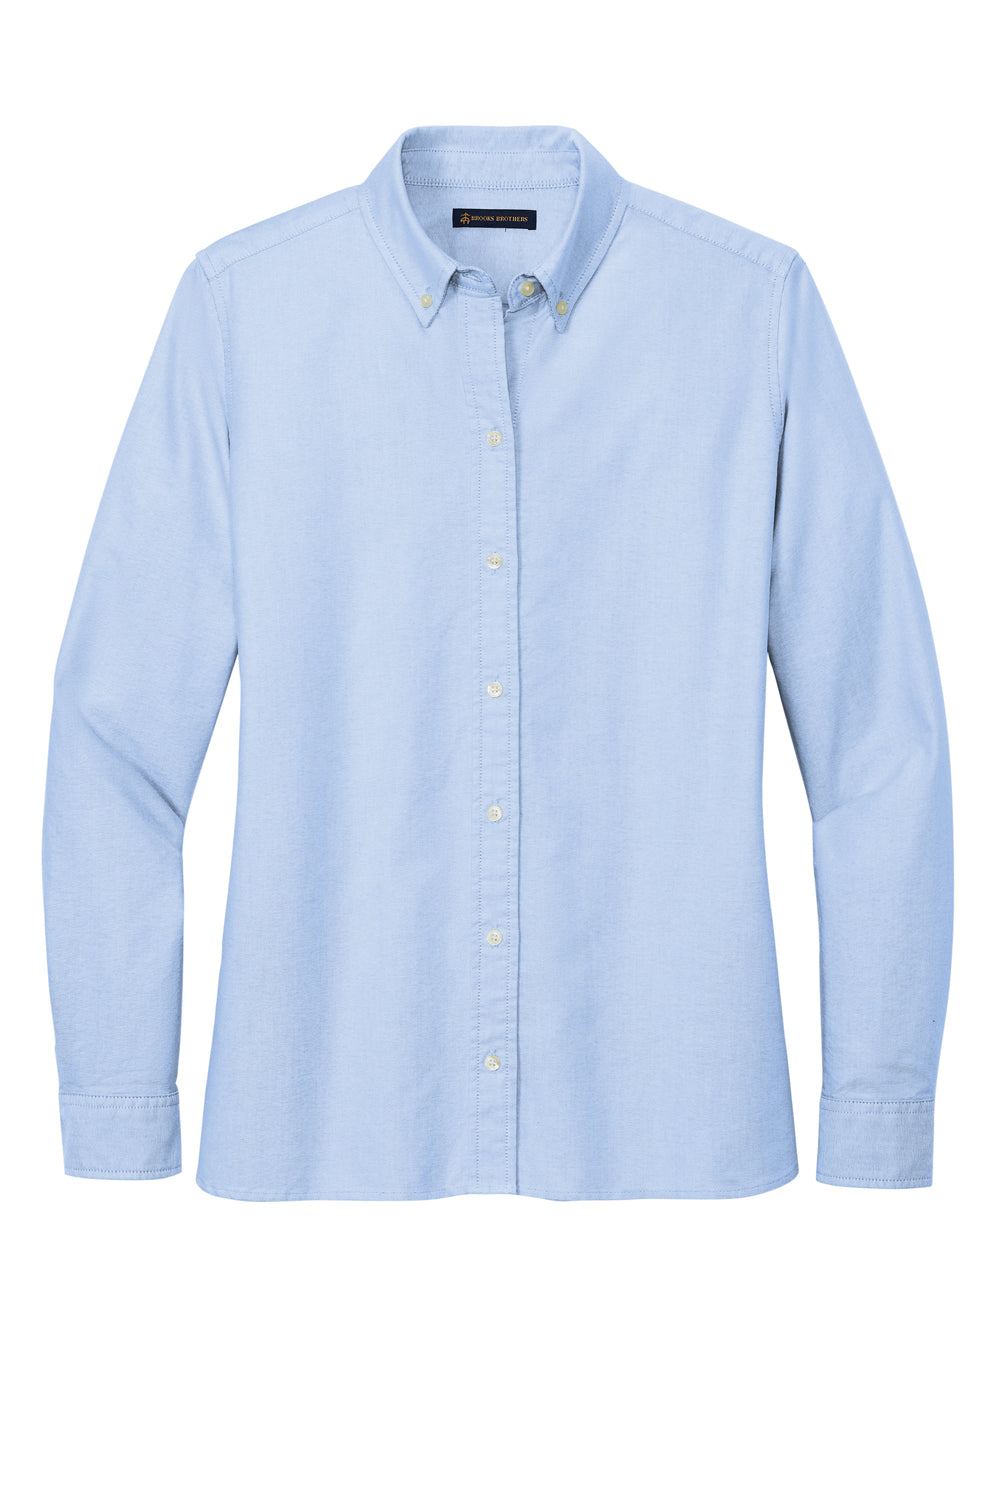 Brooks Brothers Womens Casual Oxford Long Sleeve Button Down Shirt Newport Blue Flat Front